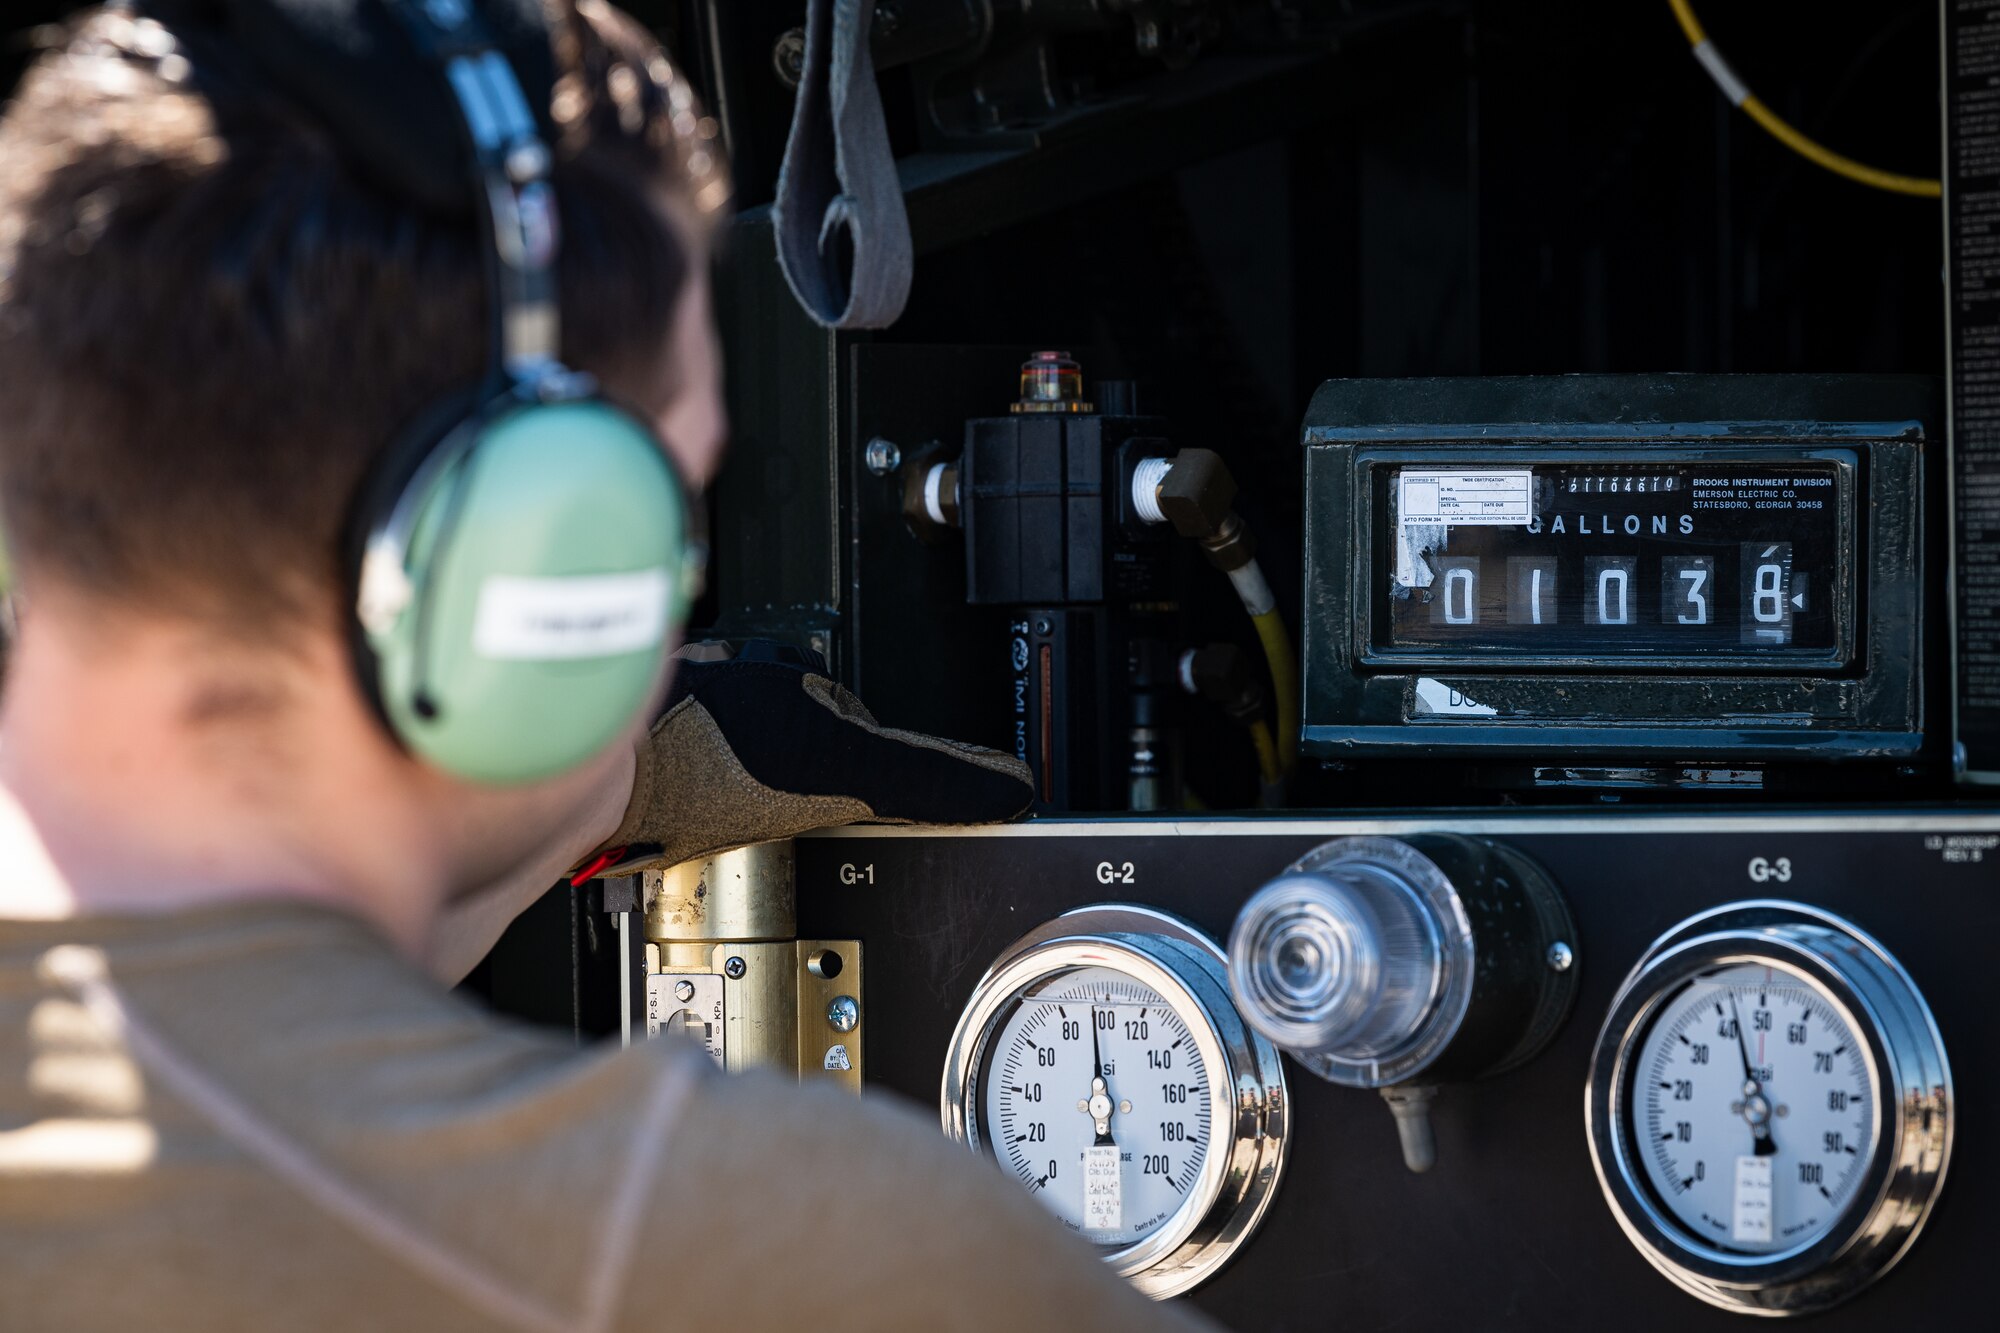 A photo of an Airman watching fuel gauges